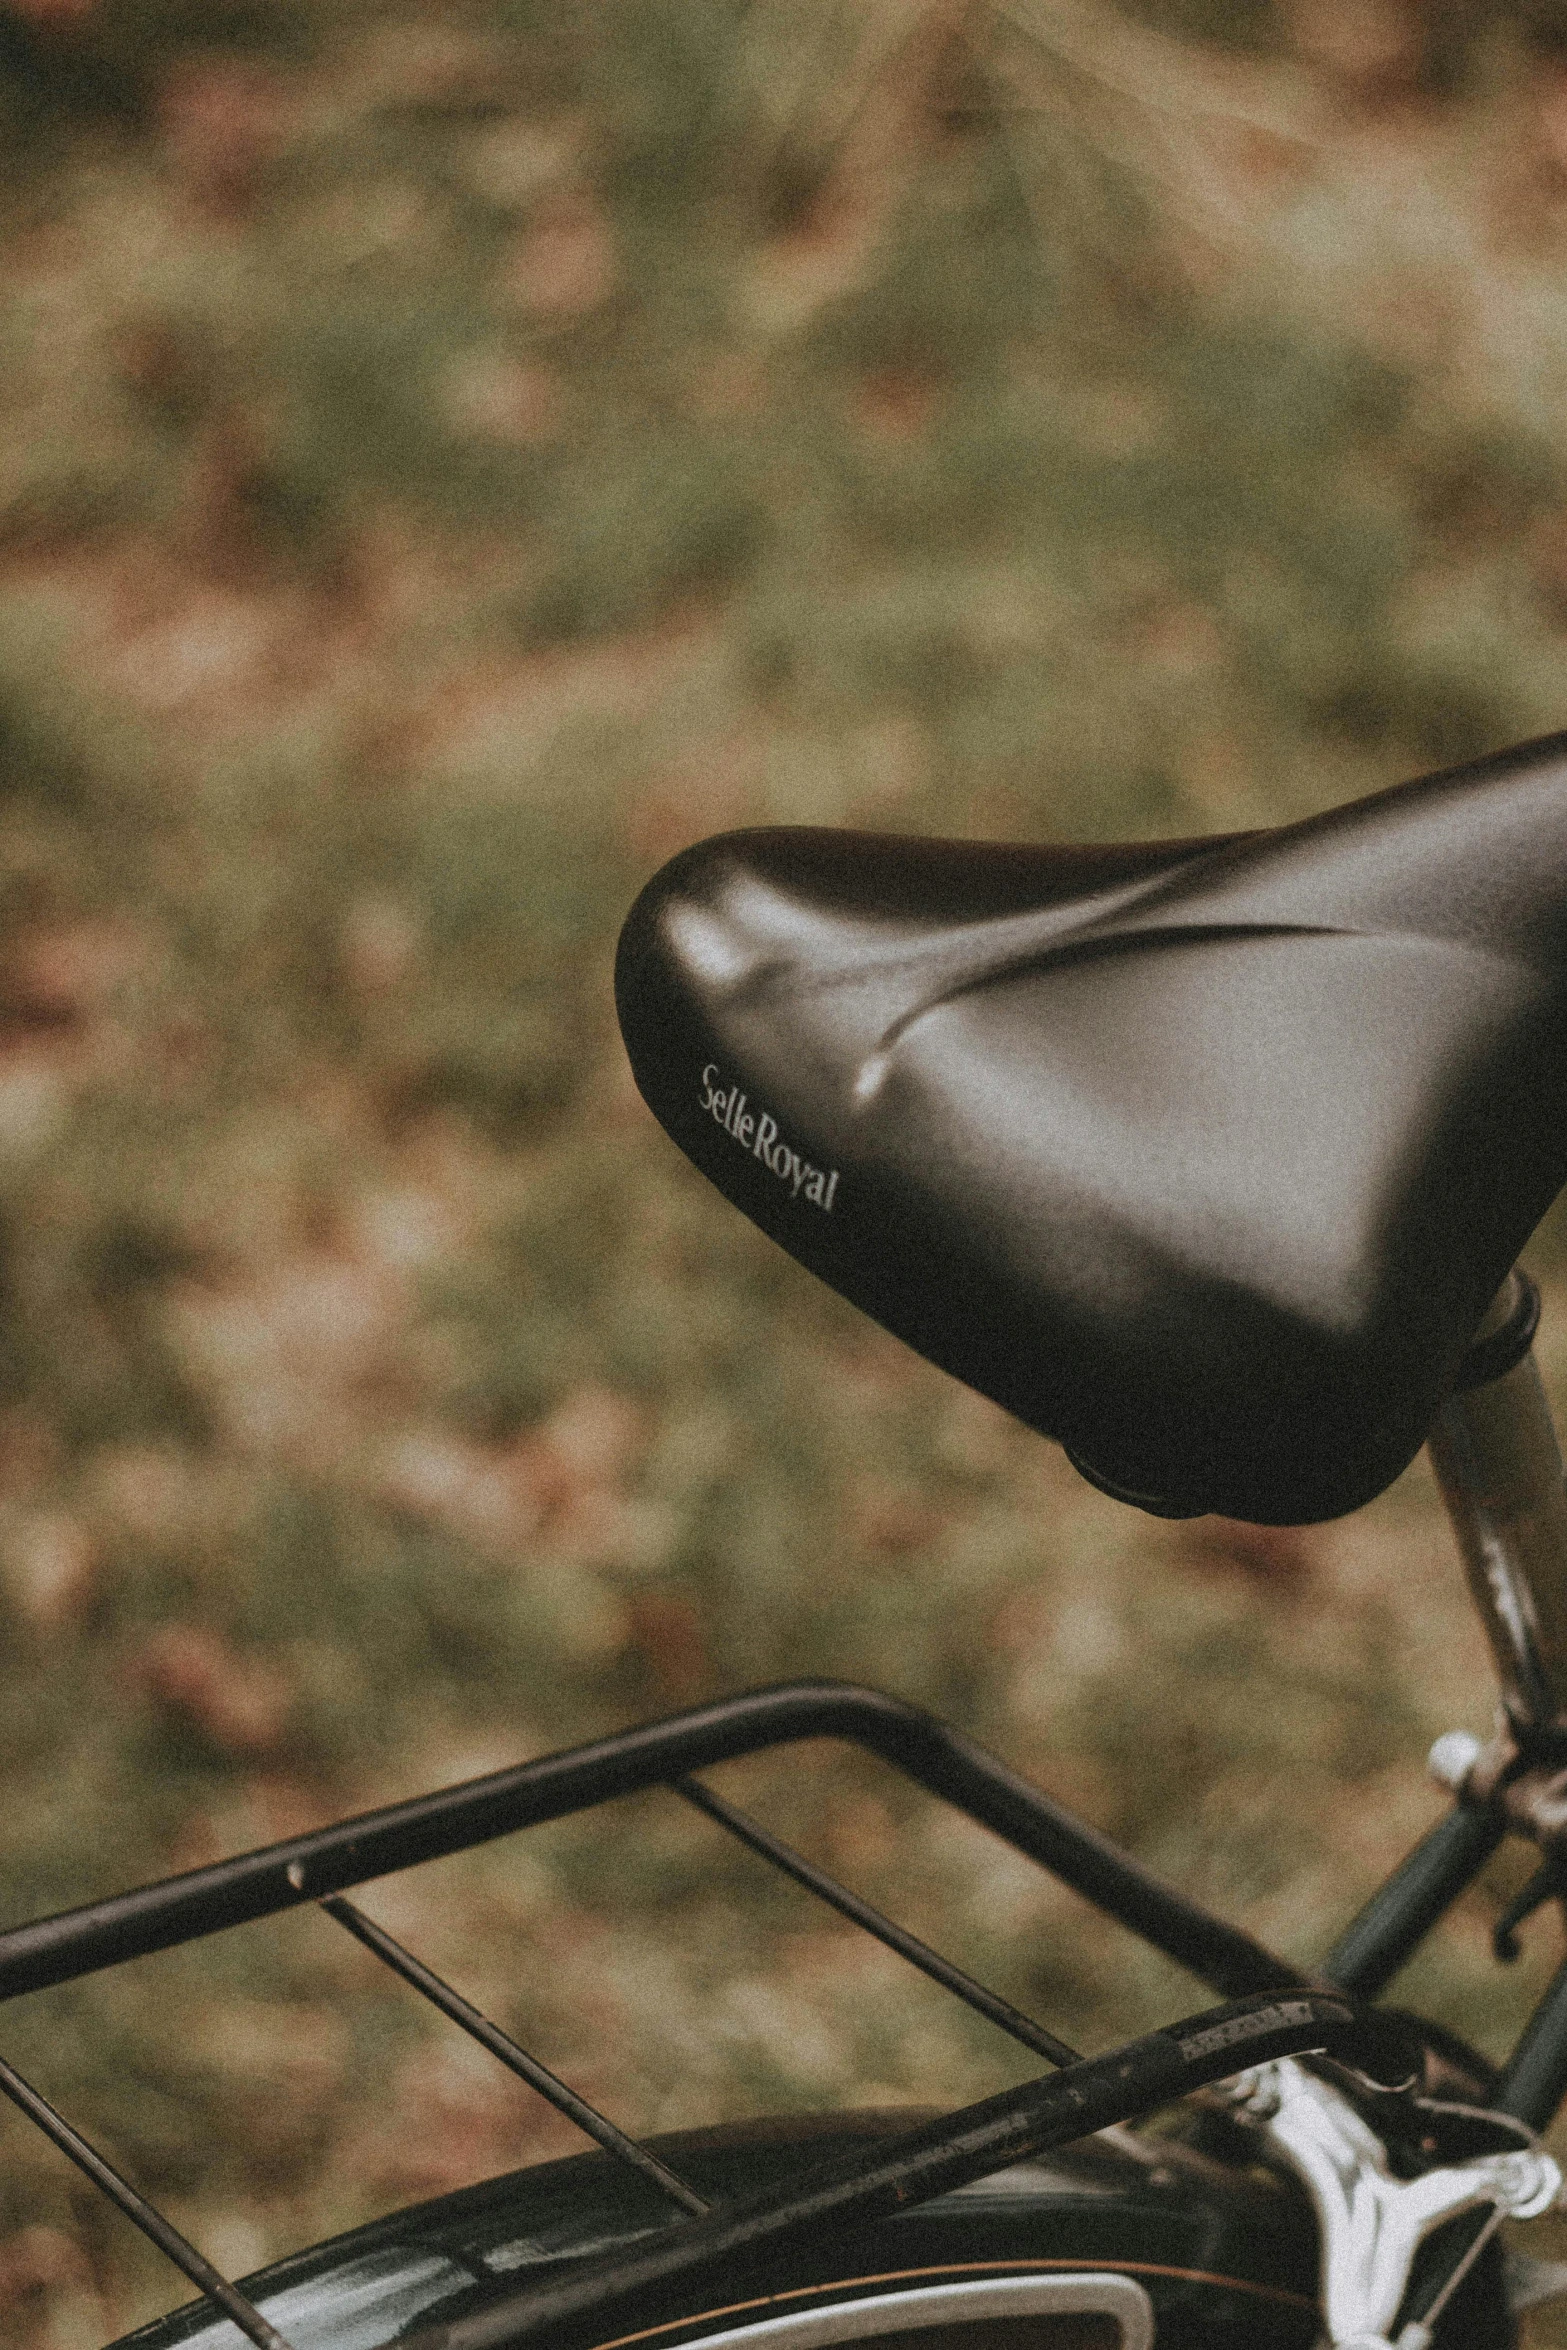 a close up of a bike saddle, with the seat and frame closed